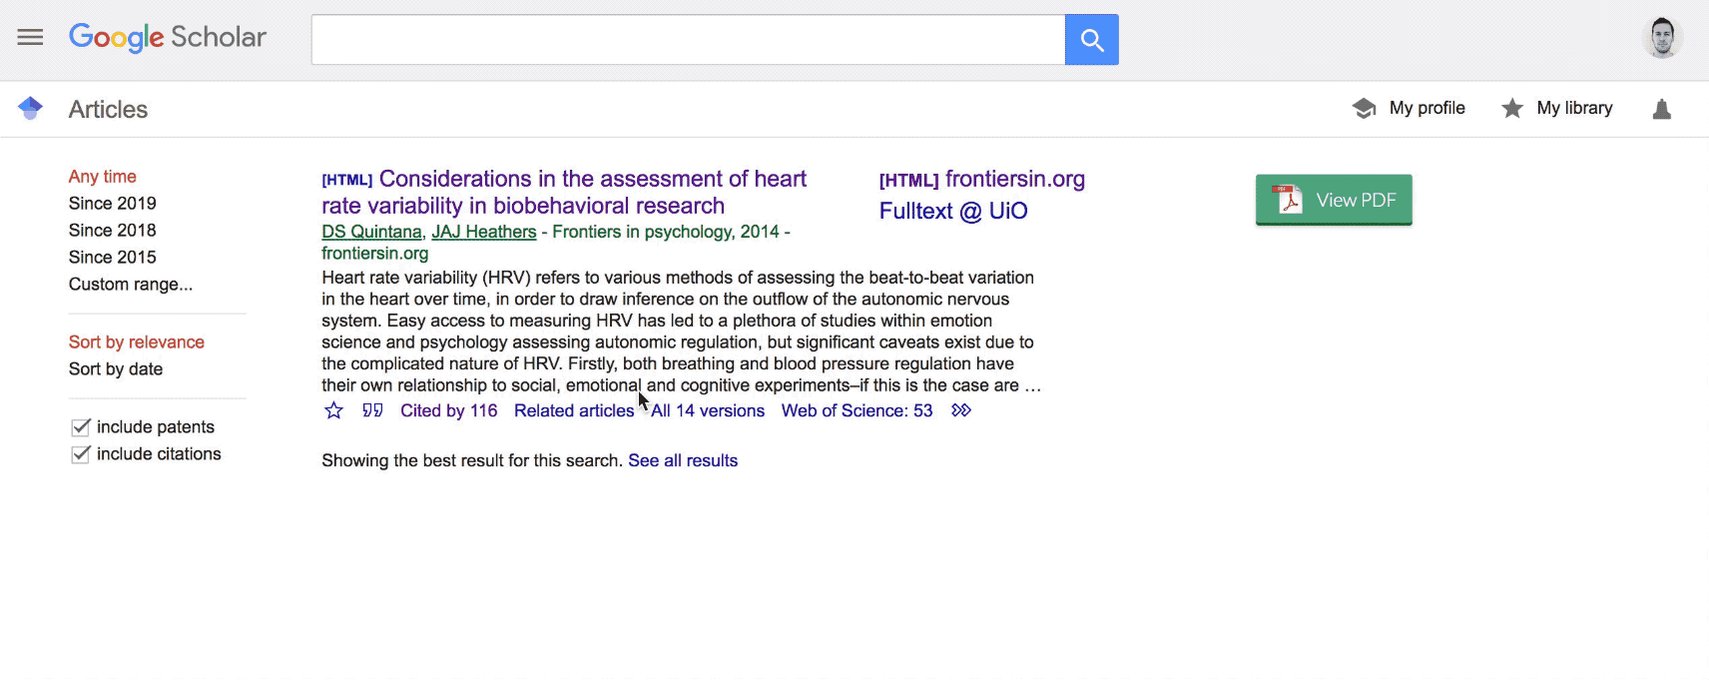 Can Google Scholar exclude self-citations?